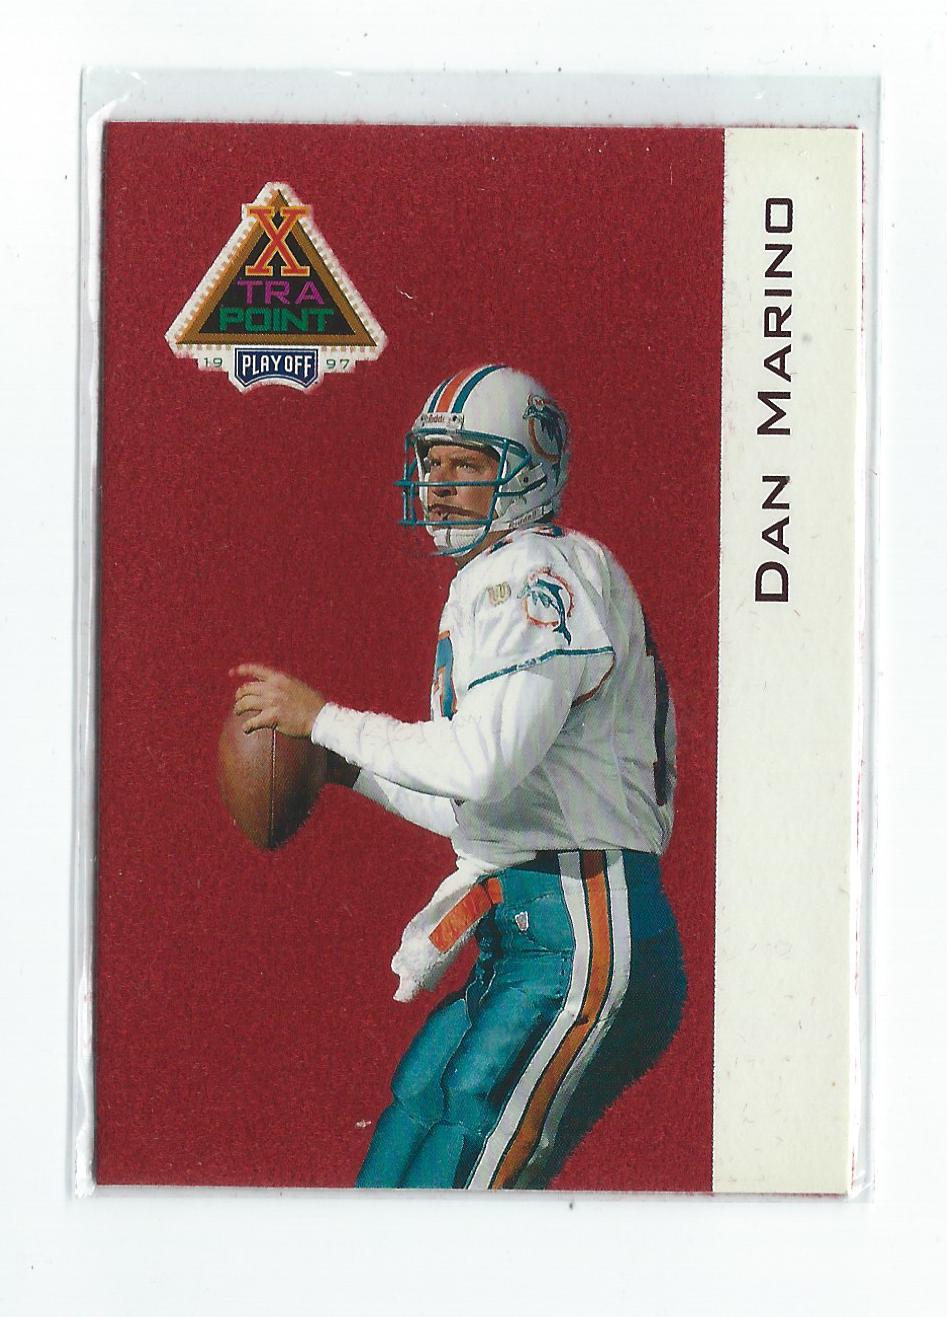 1997 Playoff First and Ten Xtra Point #XP2R Dan Marino RED